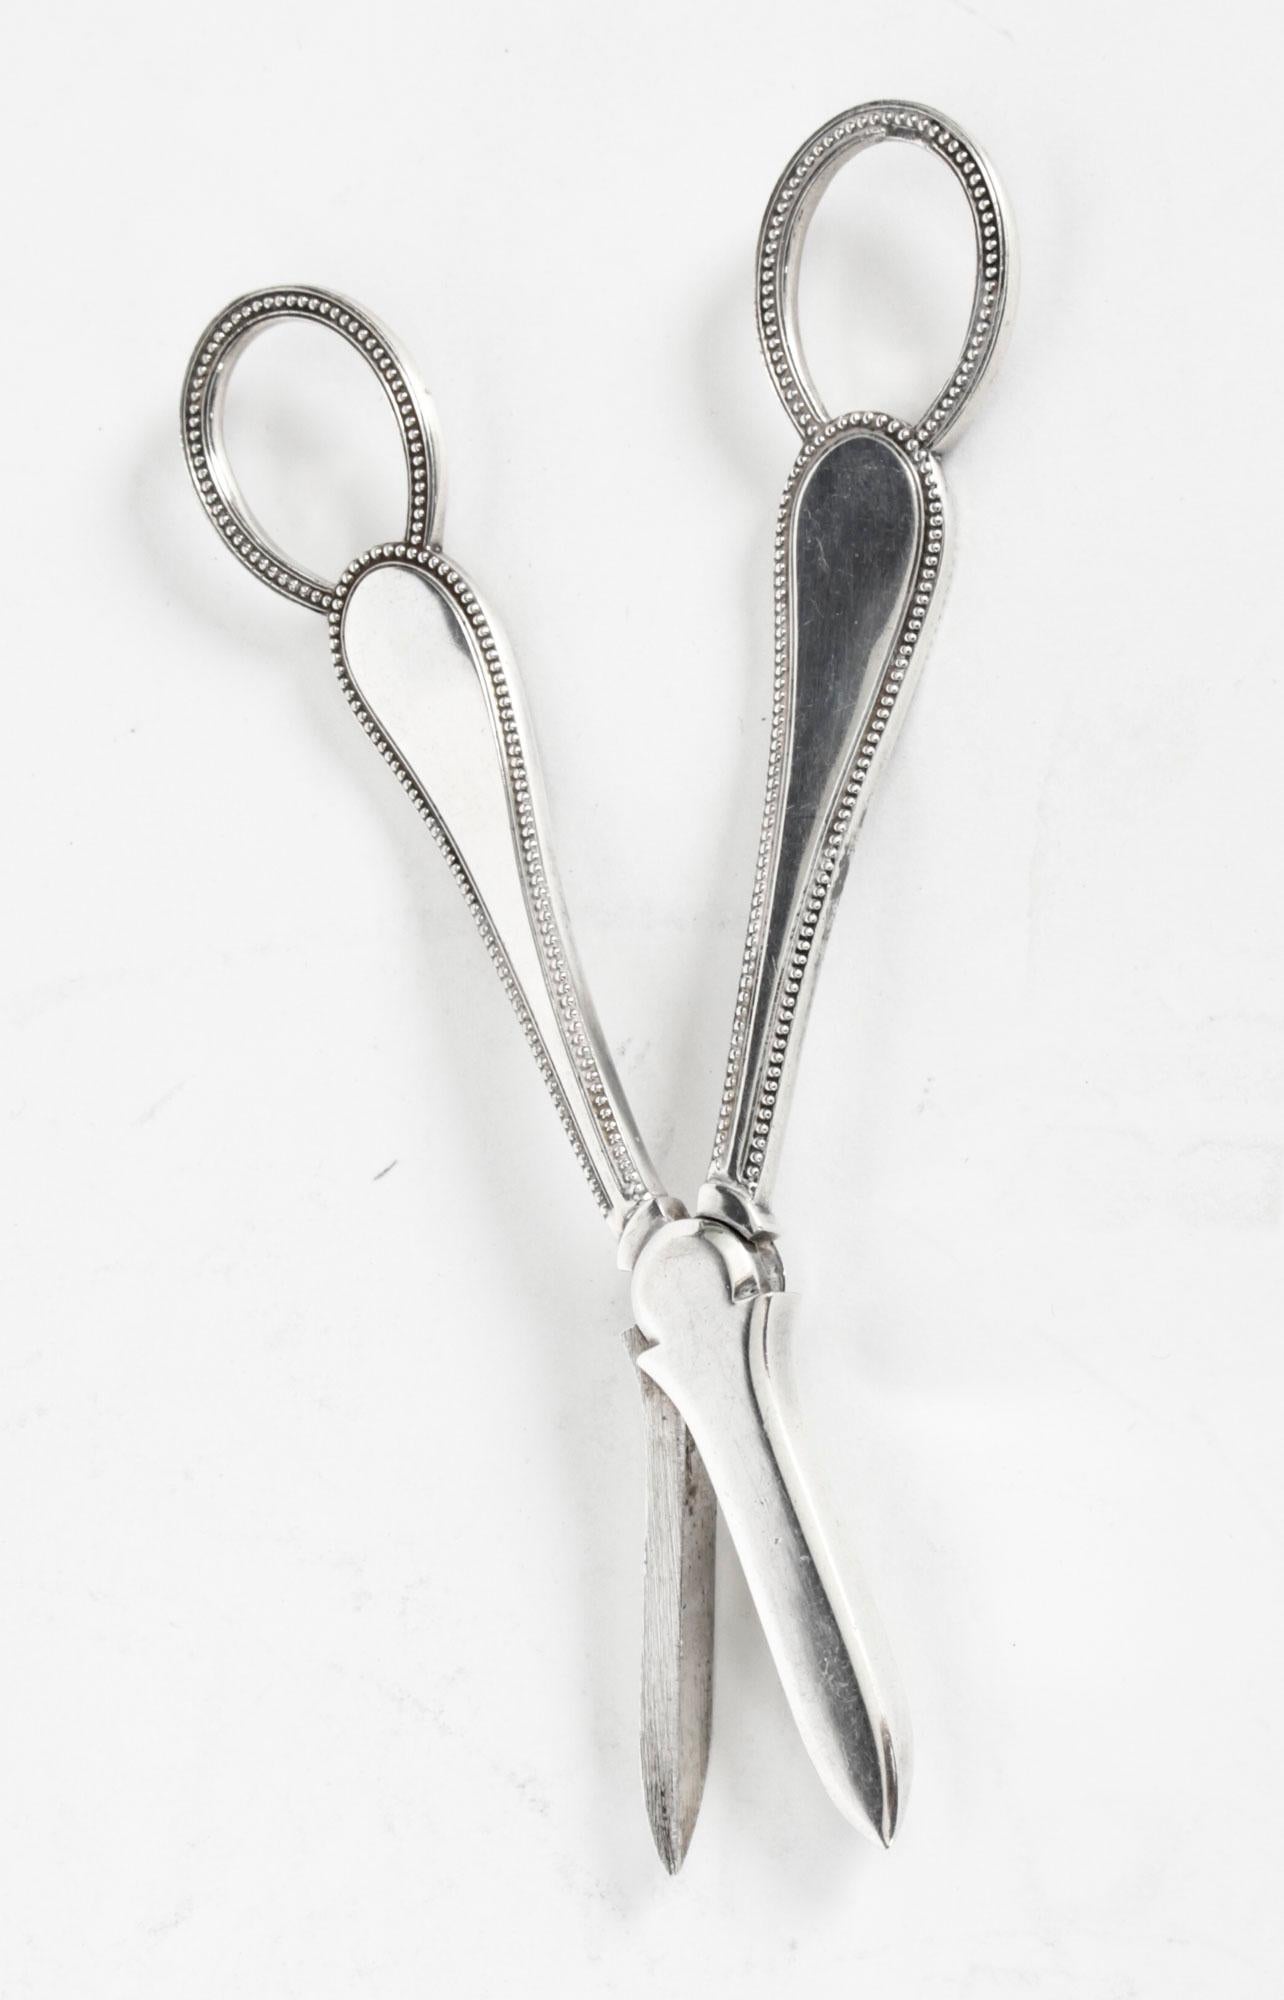 This is a very lovely pair of antique Victorian silver plated grape scissors, bearing the makers mark of Martin Hall & Co., and circa 1910 in date.

They feature beaded decoration to the arms and handles.
 
Add an elegant touch to your next